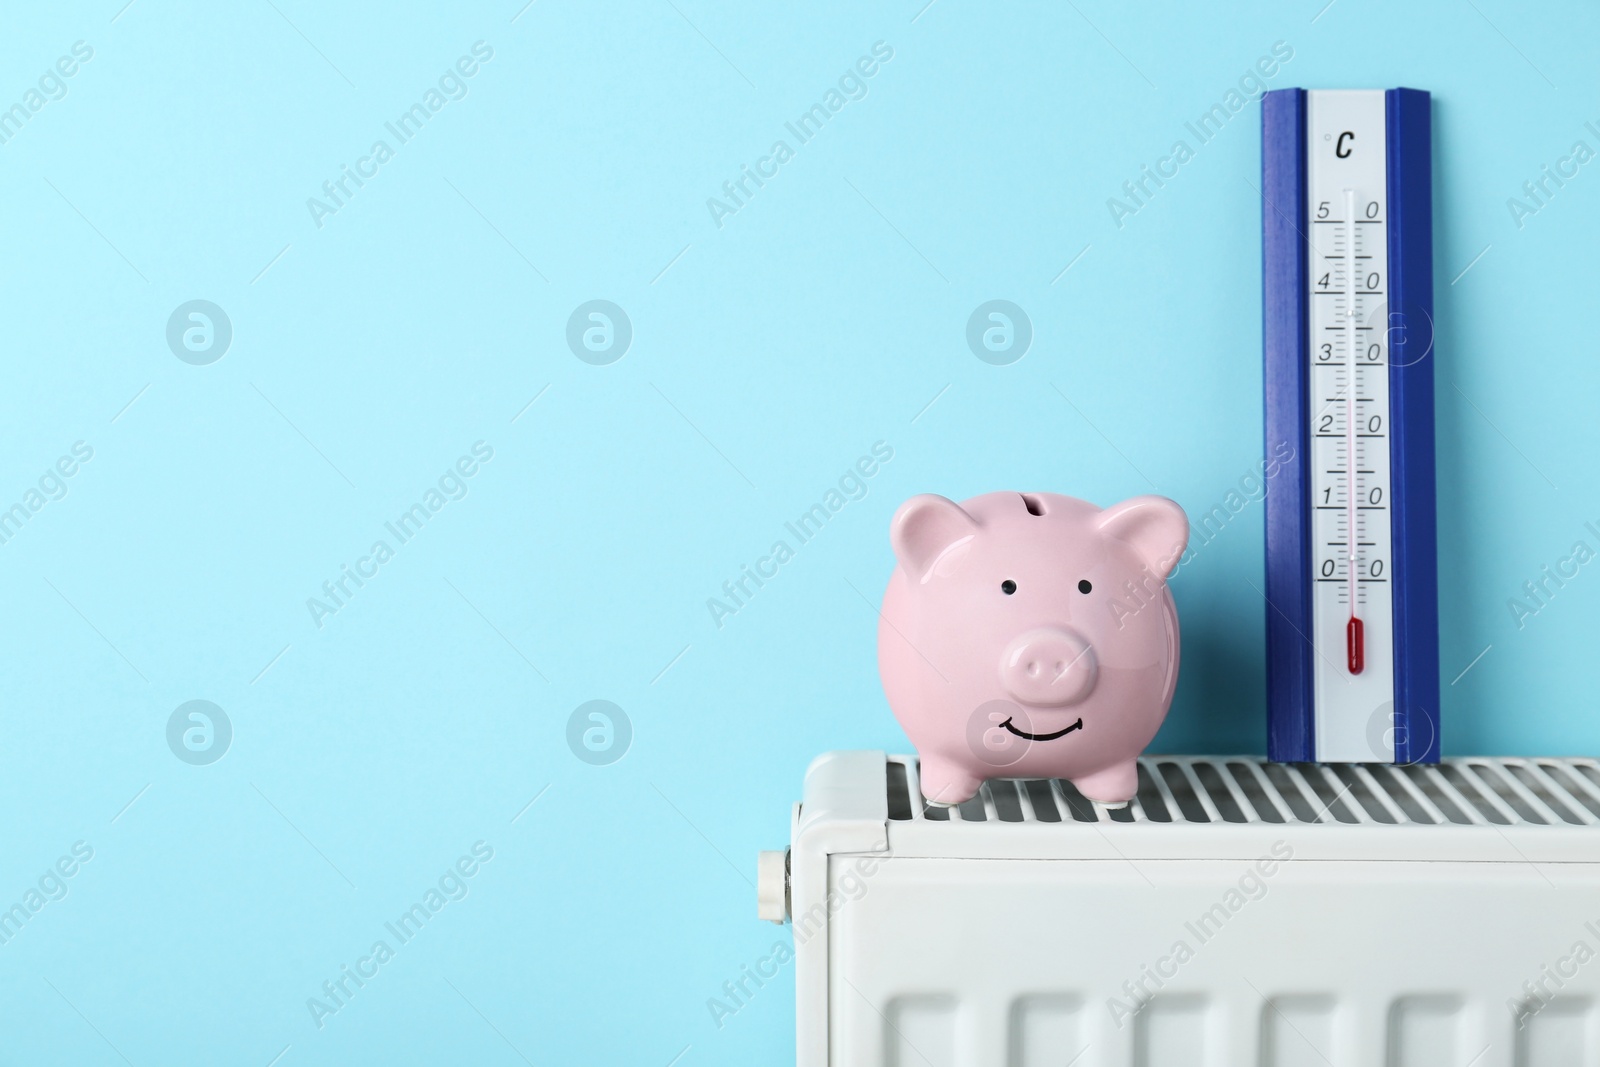 Photo of Piggy bank and thermometer on heating radiator against light blue background, space for text